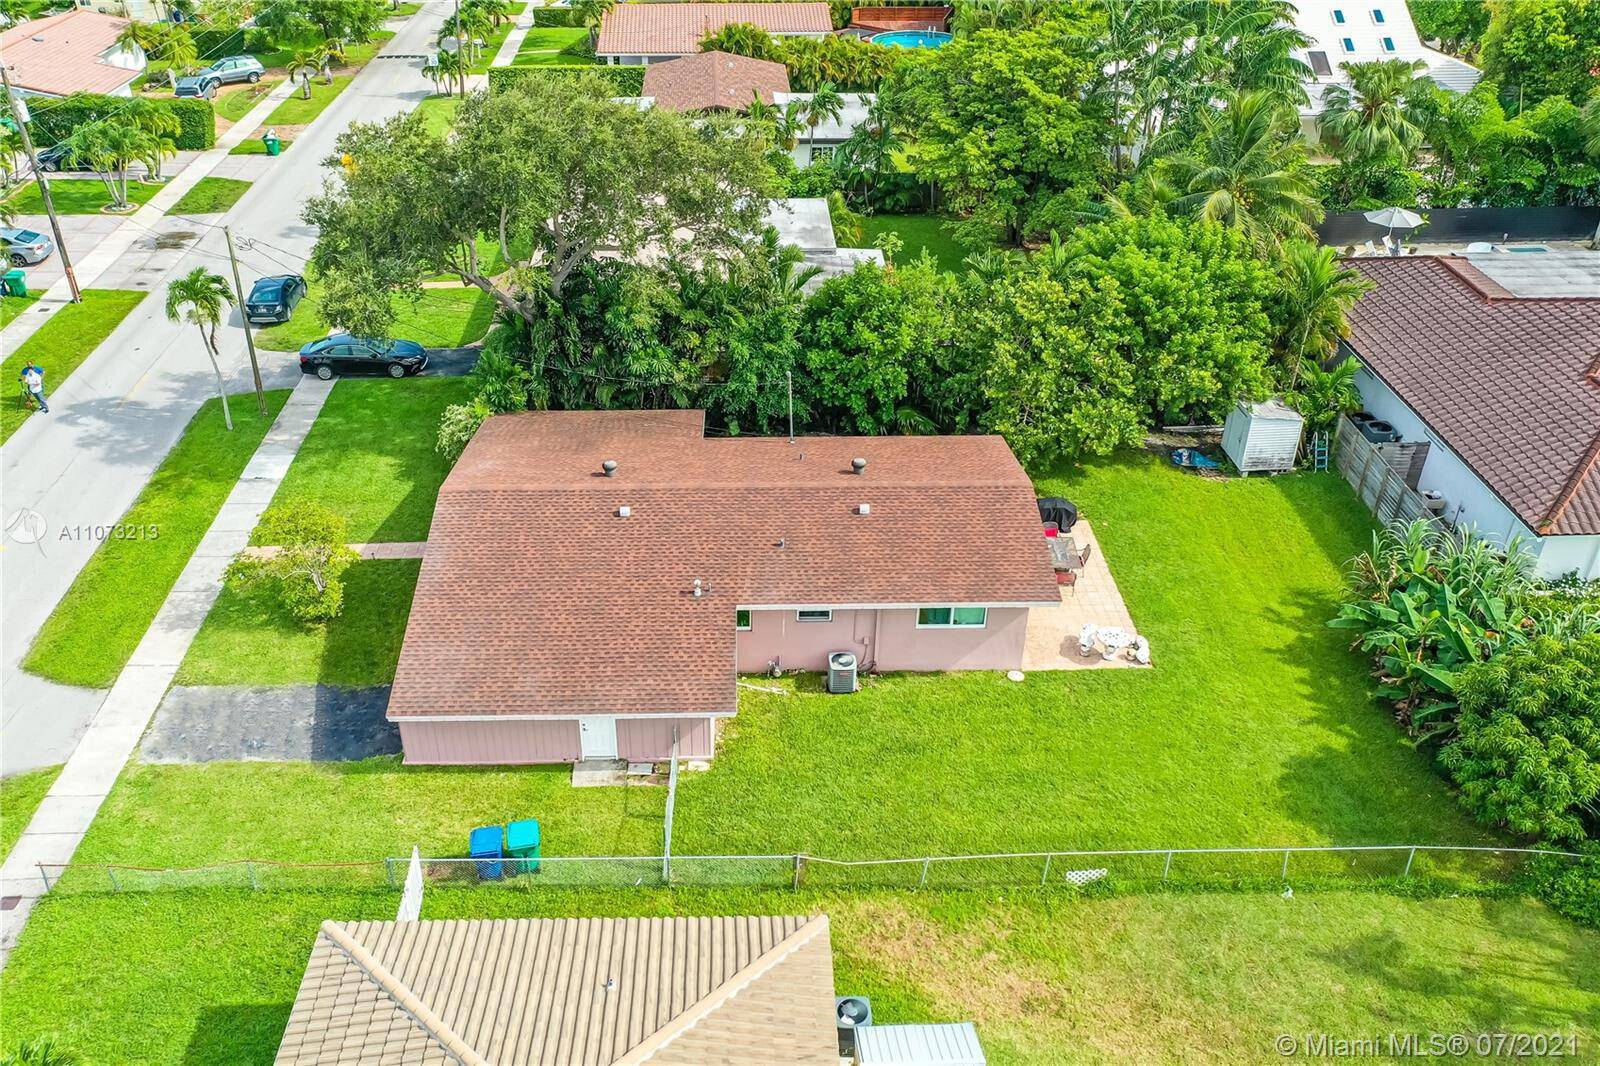 Heart of Aventura Single Family Home located in the gated area of Highland Lakes.